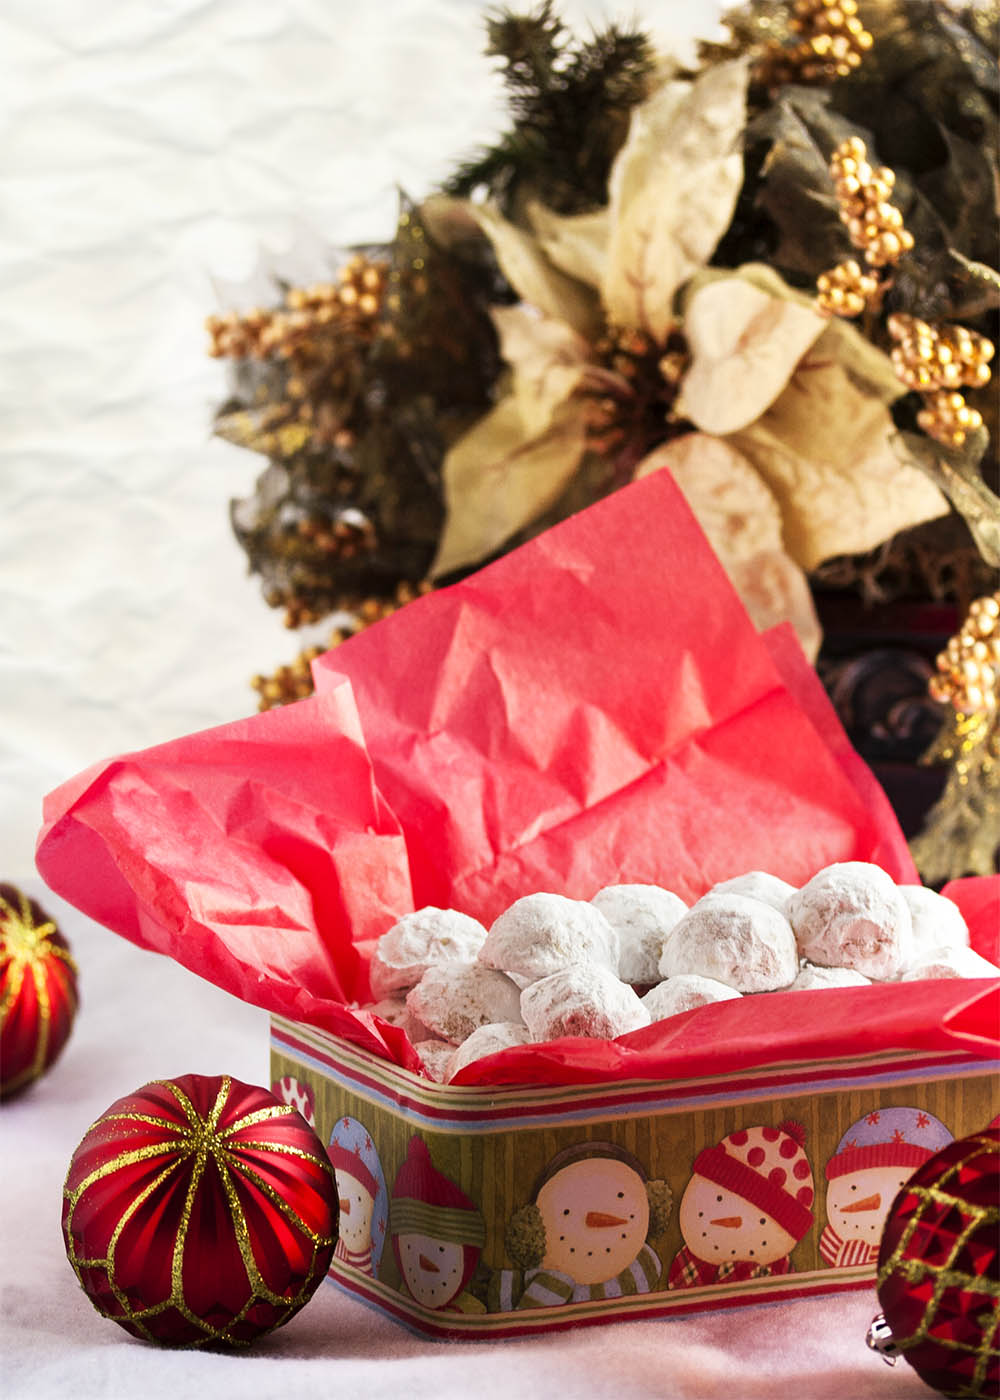 Pecan Snowball Cookies - These Pecan Snowball Cookies are melt-in-your-mouth tender, filled with ground and chopped pecans, and covered in powdered sugar. Whether you call them Snowballs or Russian Tea Cakes or Italian Wedding Cookies, it's not Christmas without them. | justalittlebitofbacon.com